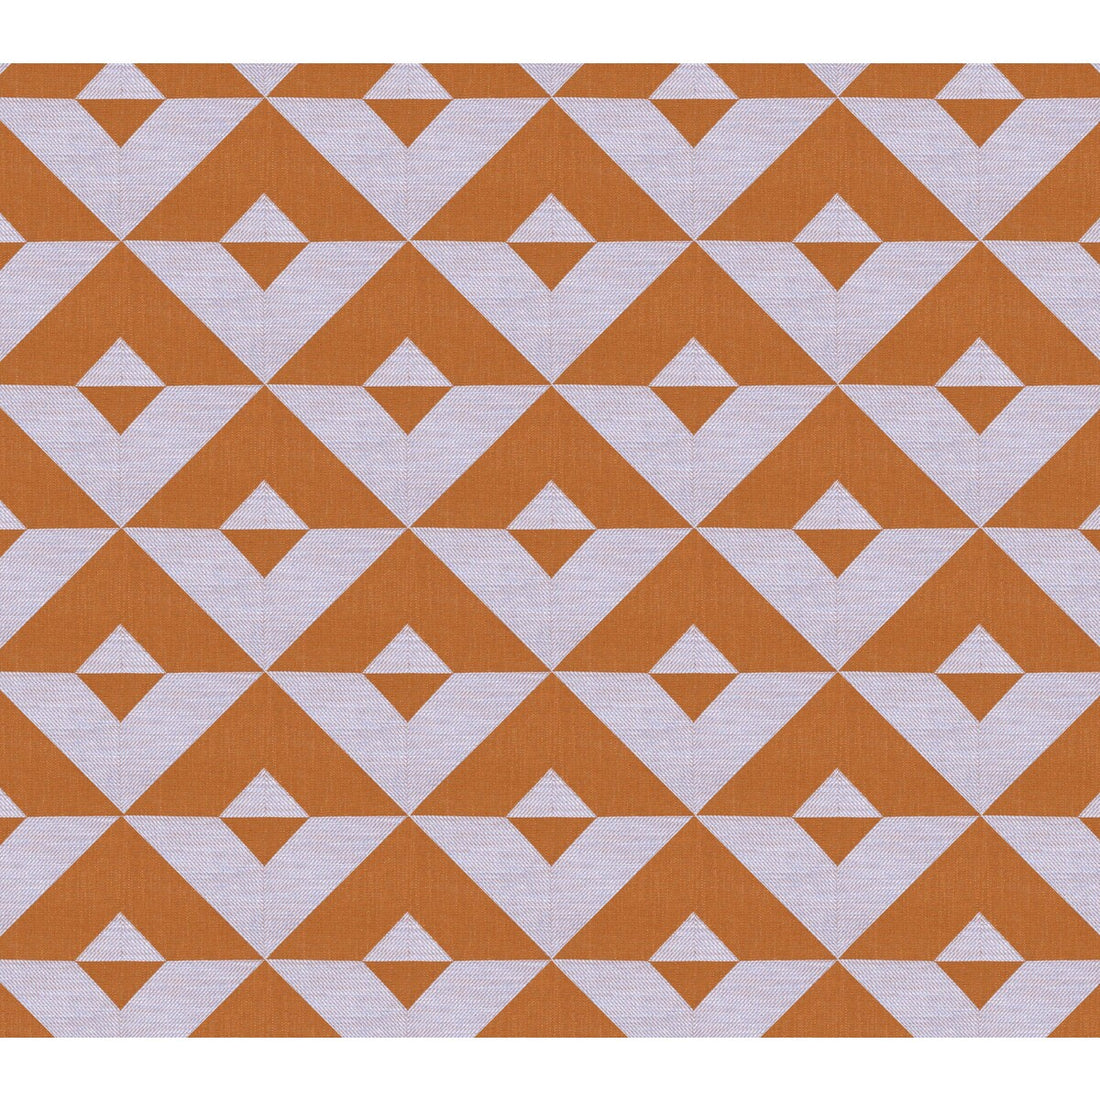 Kenia fabric in naranja color - pattern GDT5373.5.0 - by Gaston y Daniela in the Gaston Africalia collection